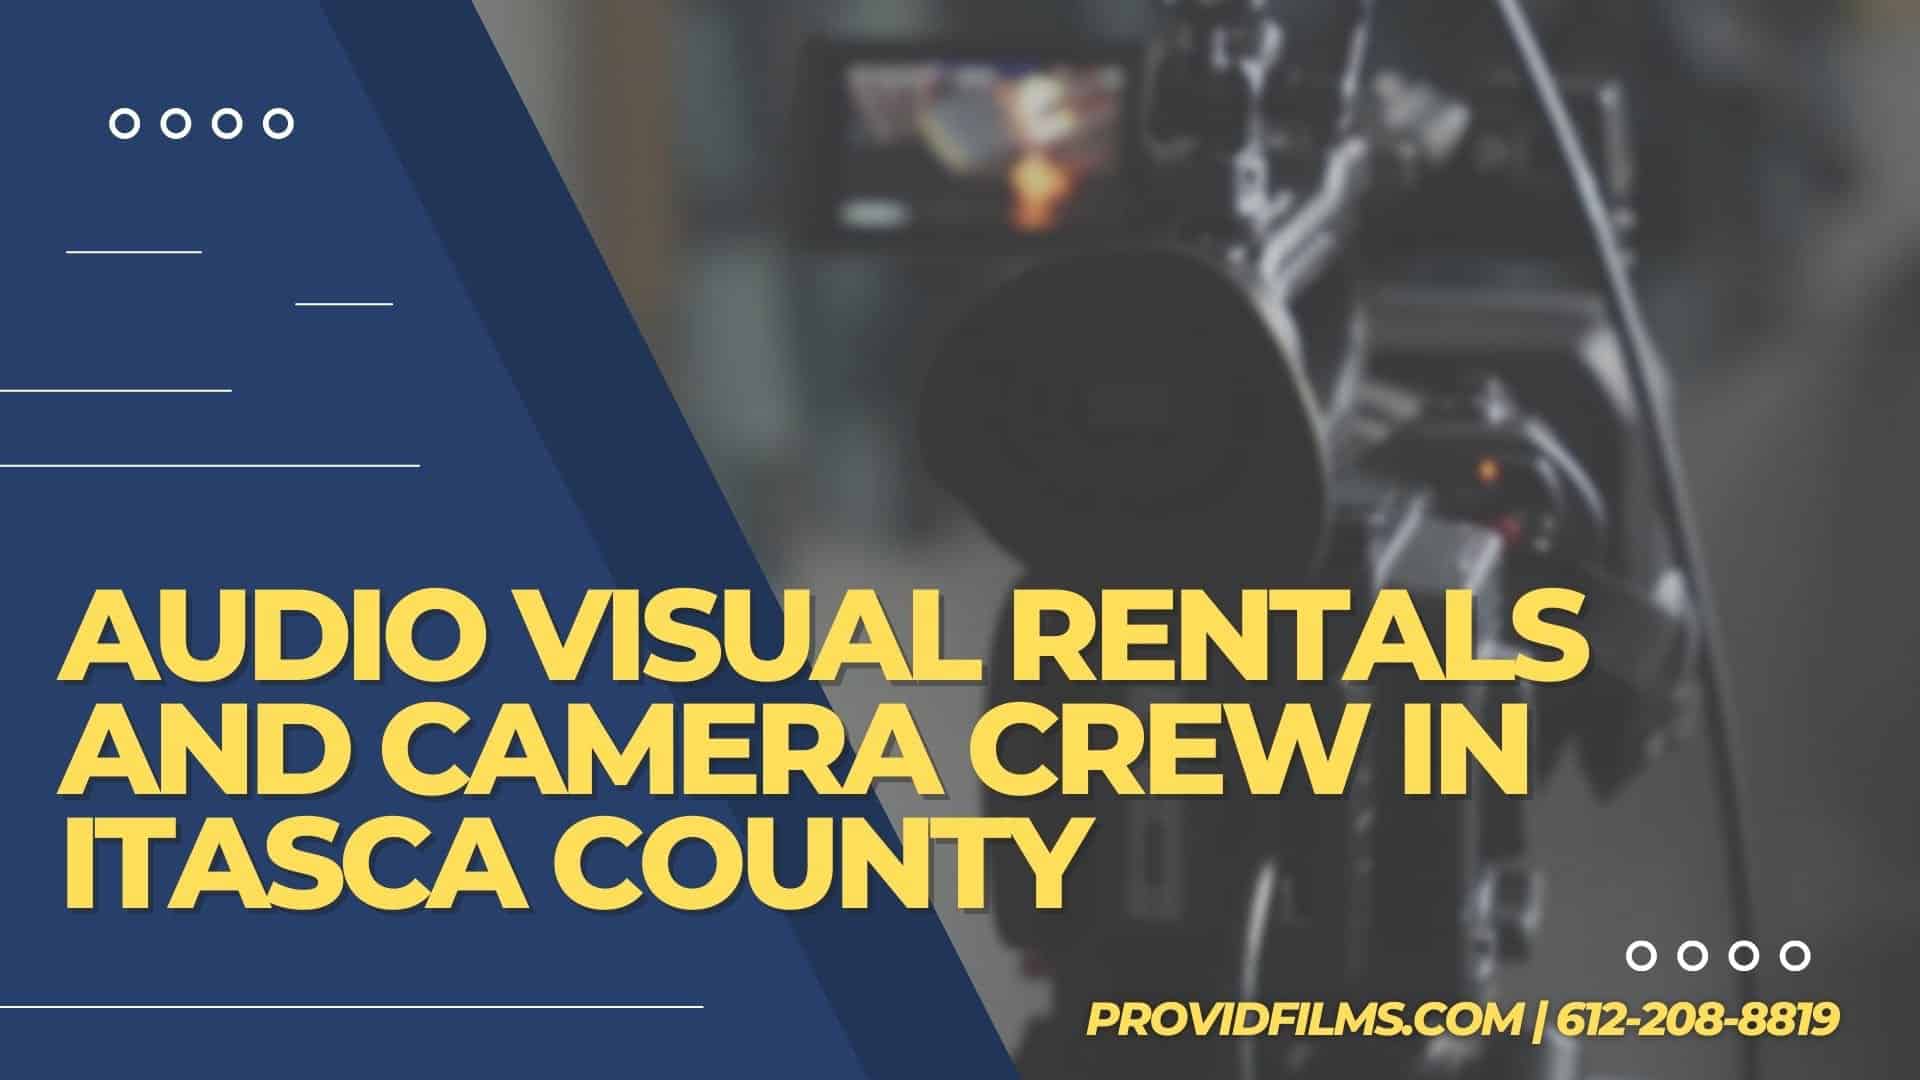 Graphic with a video camera crew with the text saying "AV Rental and Camera Crew in Itasca County"